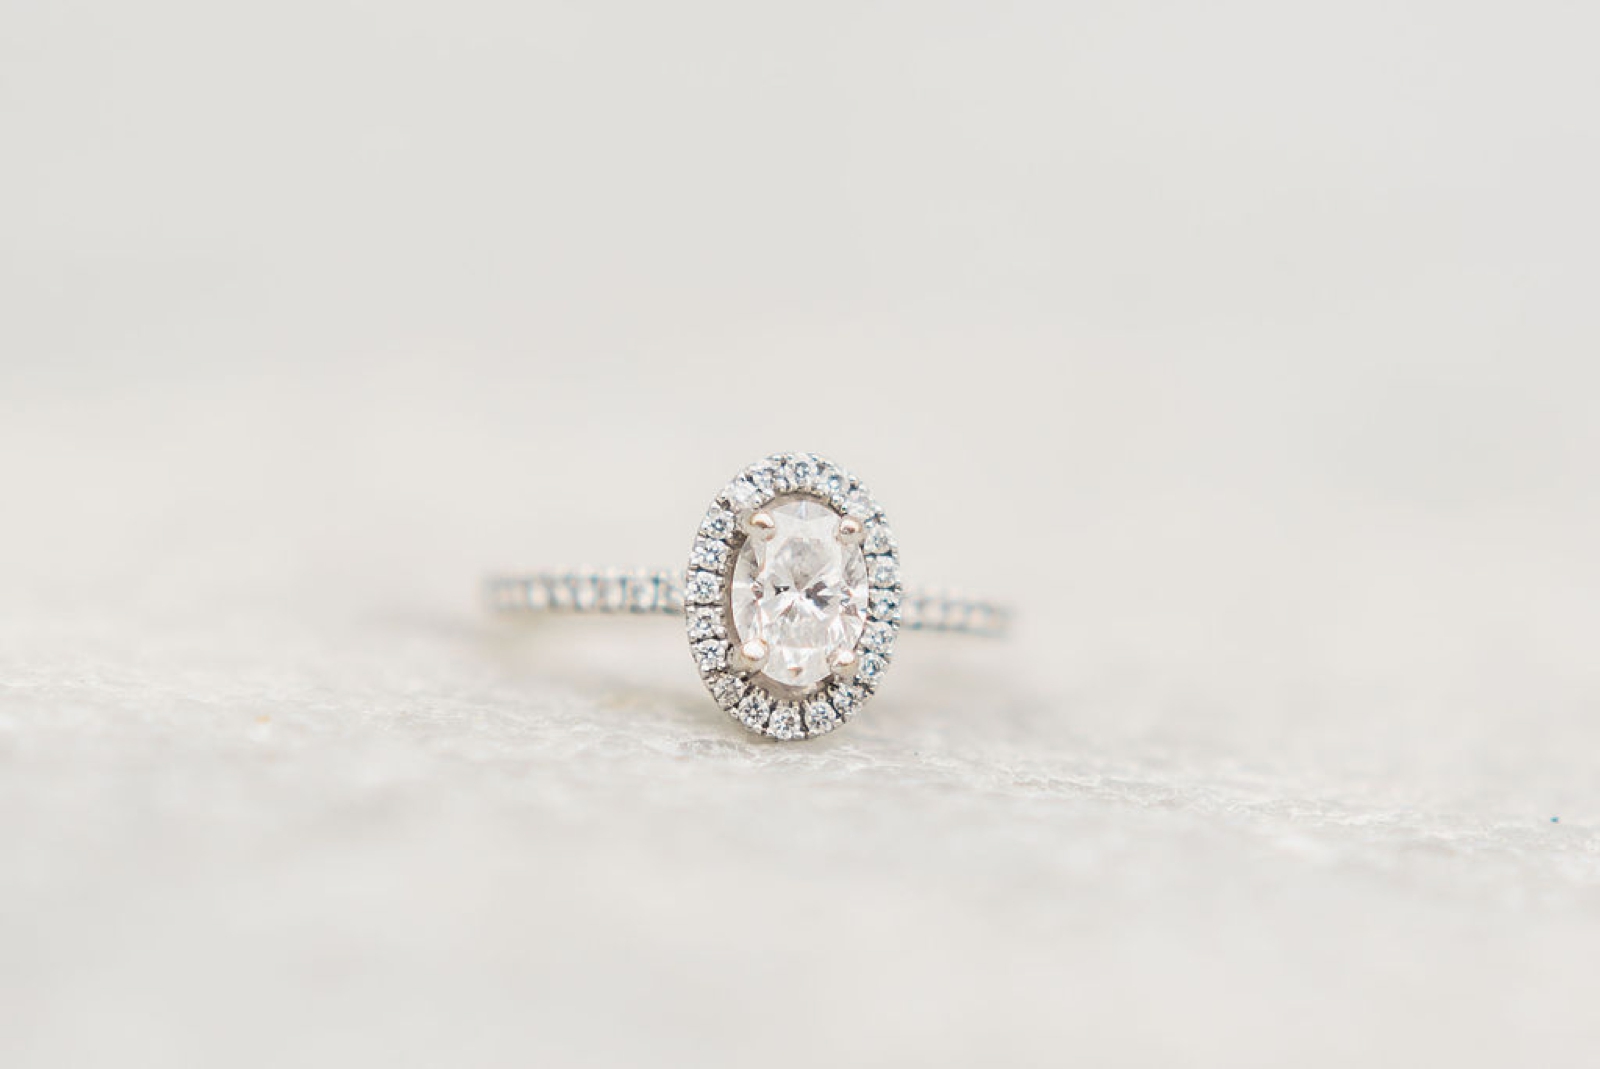 Oval solitaire diamond engagement ring